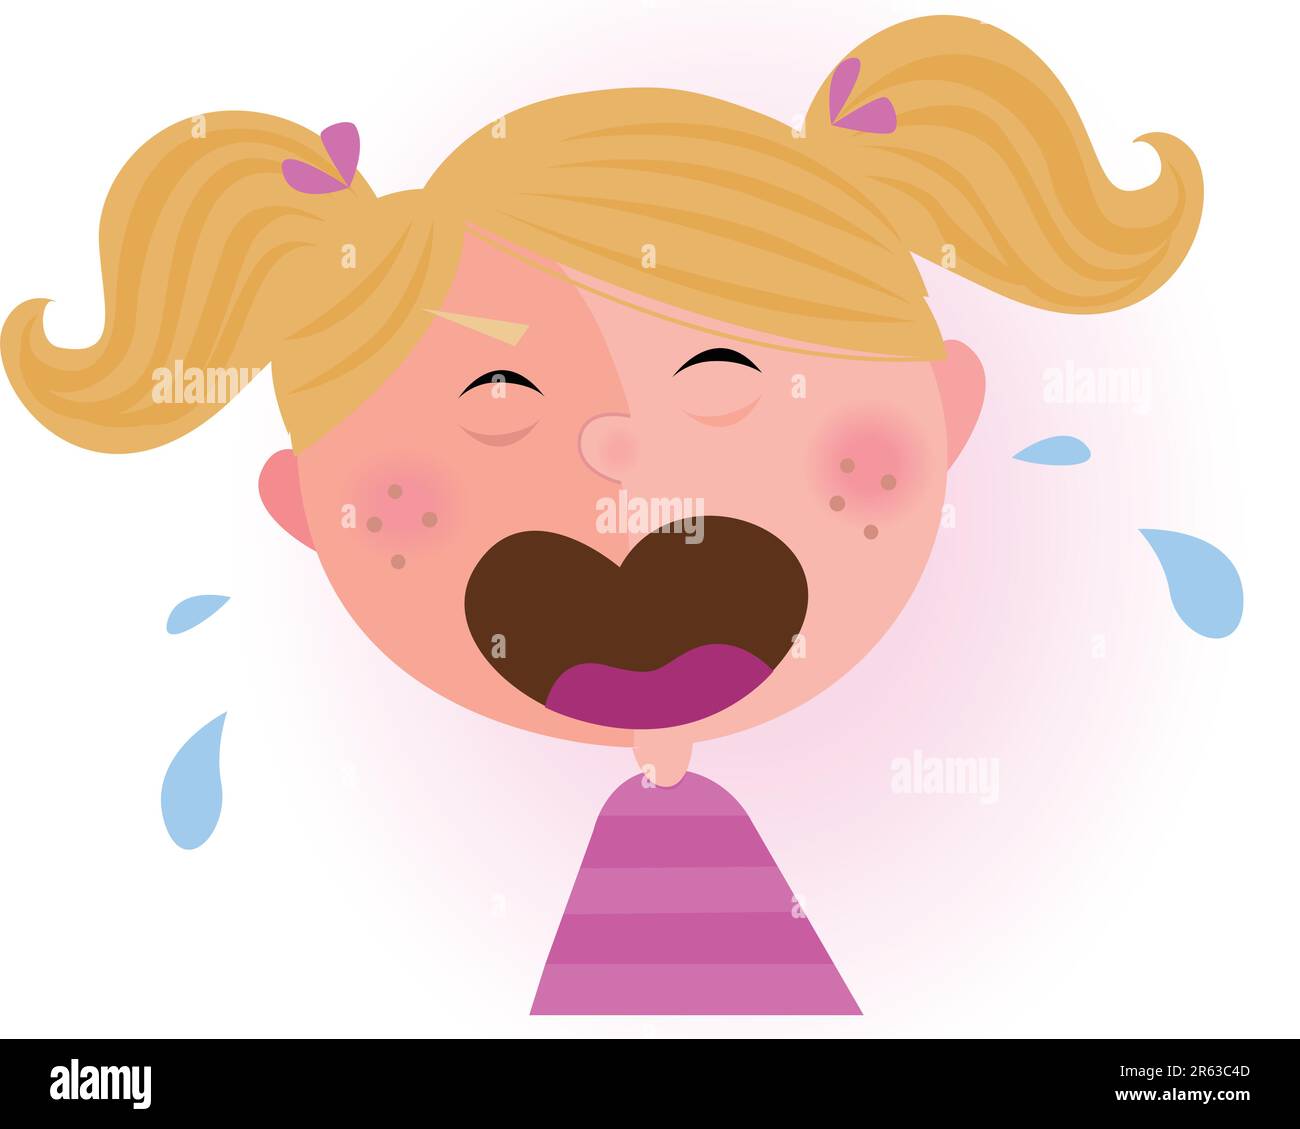 Crying small child. Vector cartoon illustration of cute crying baby girl. Stock Vector